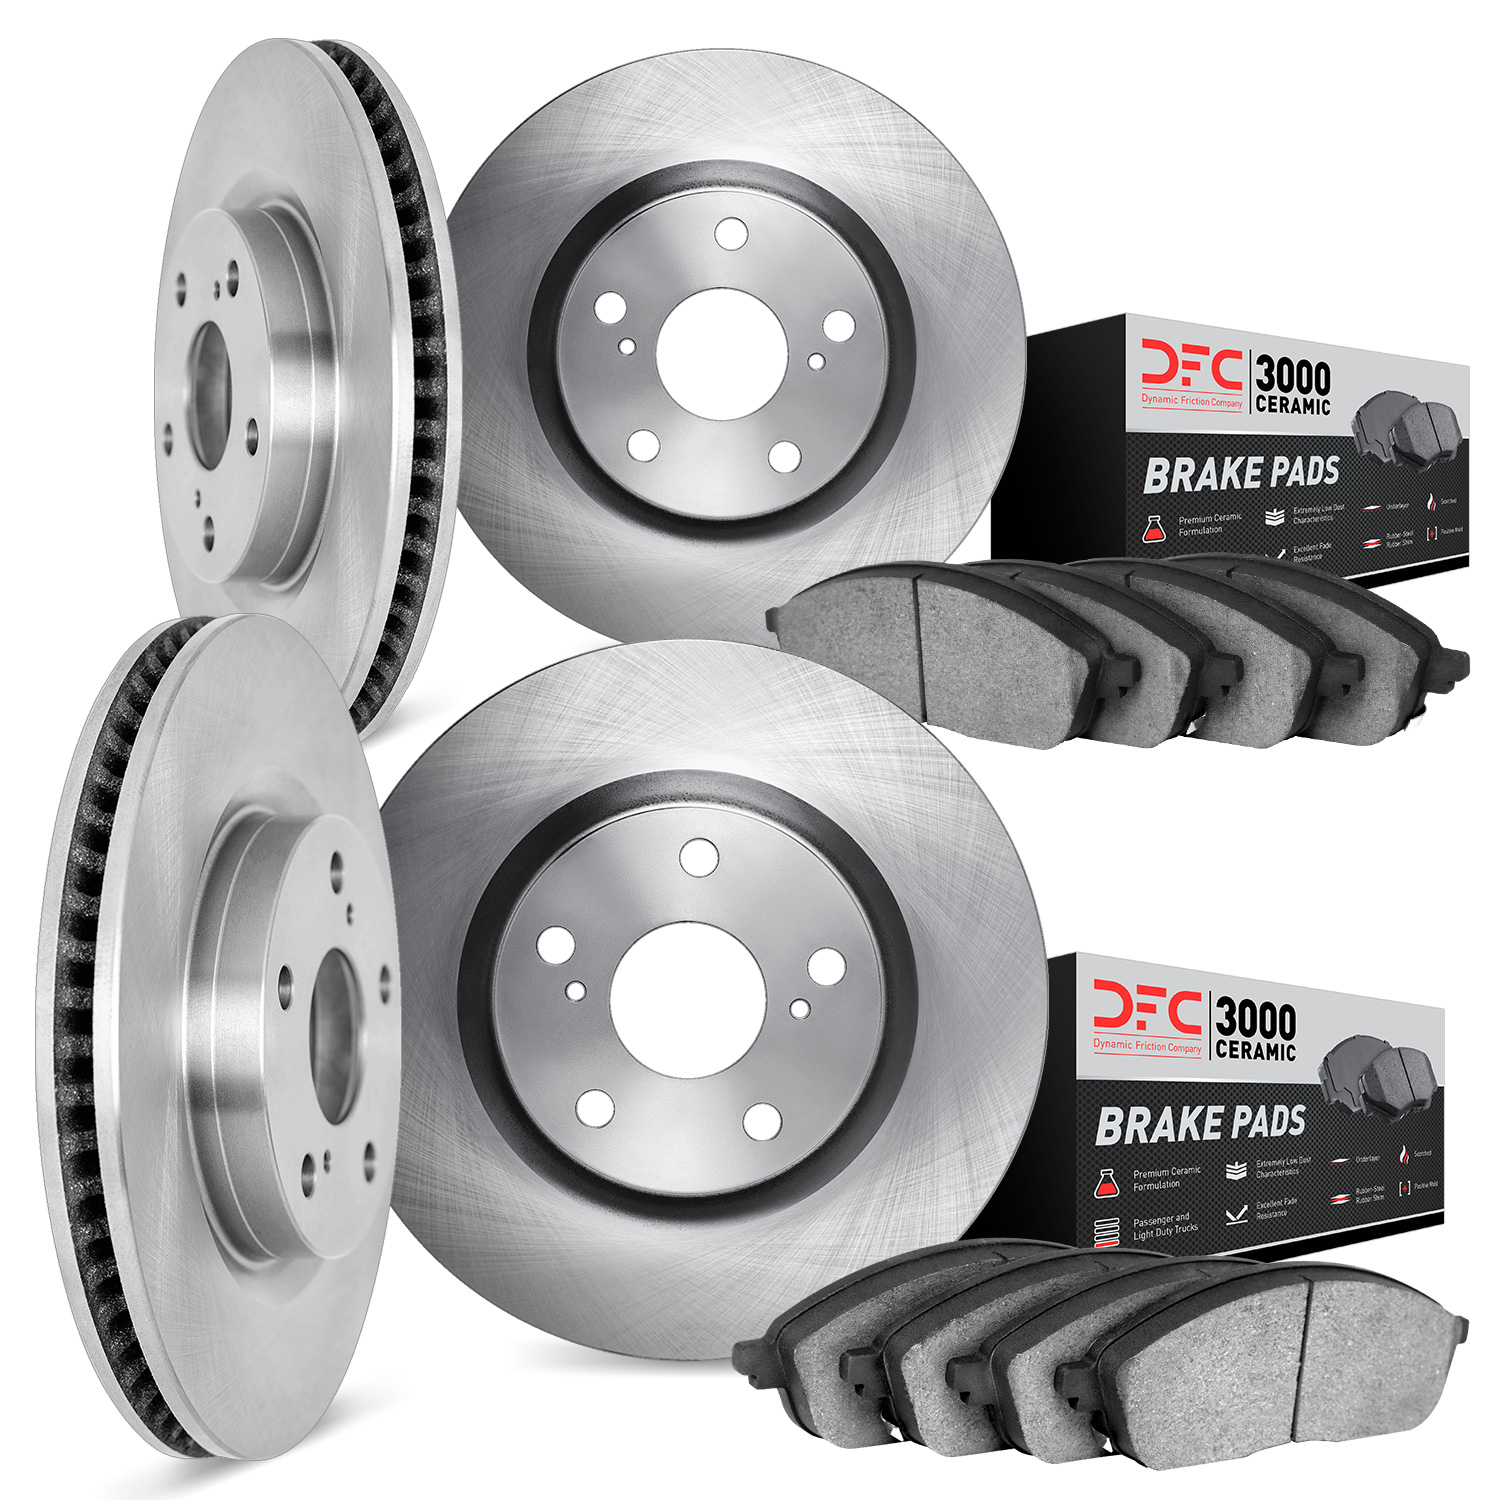 6304-31068 Brake Rotors with 3000-Series Ceramic Brake Pads Kit, 2004-2010 BMW, Position: Front and Rear